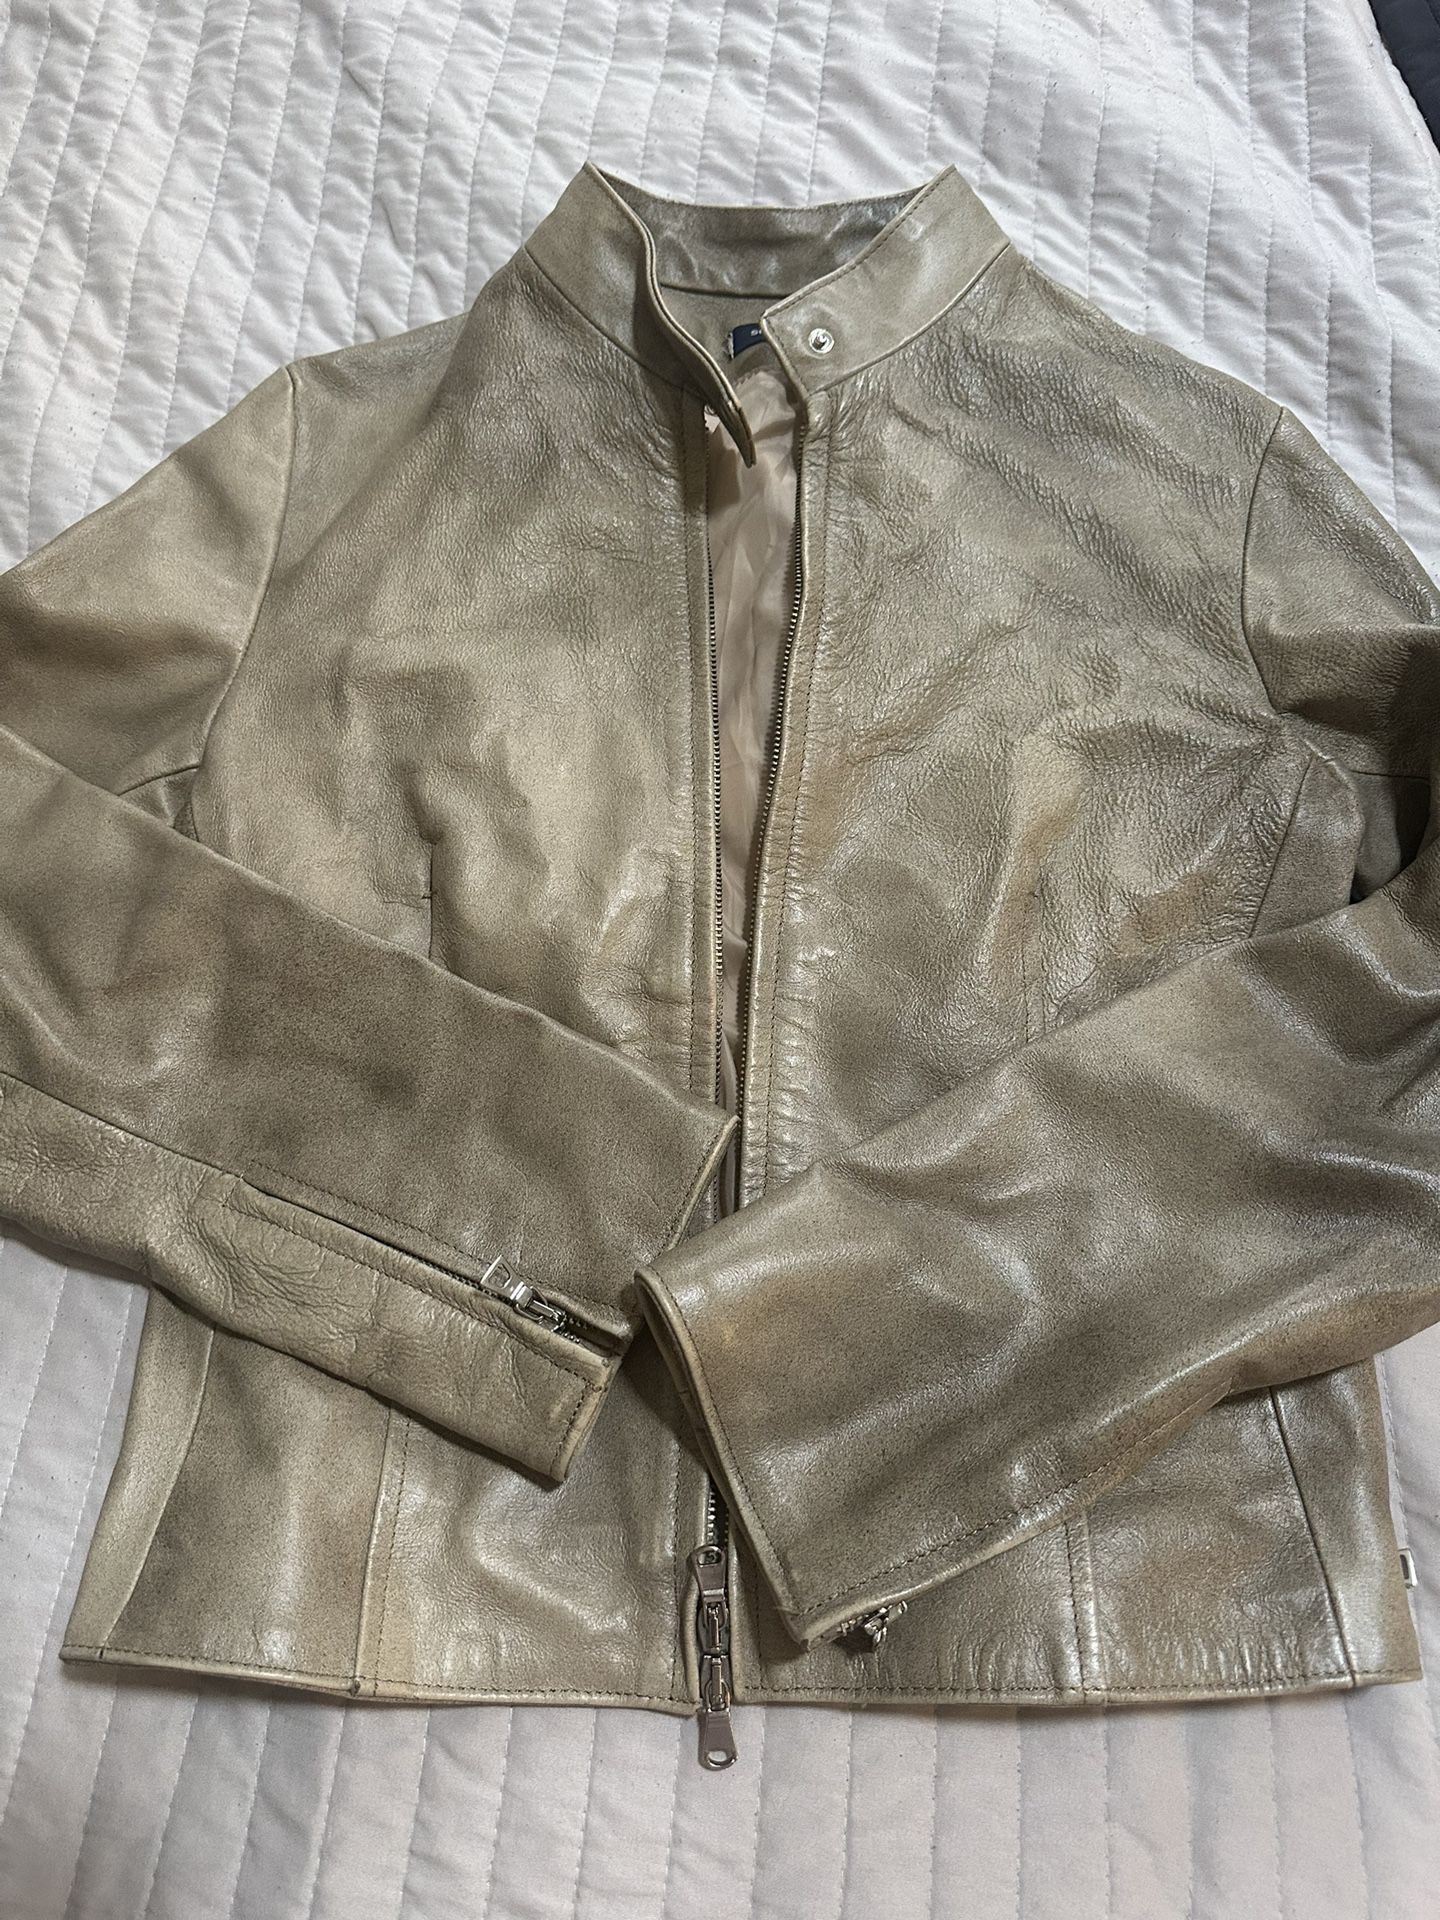 True Leather Beige Woman Jacket - Imported From Italy Size M 